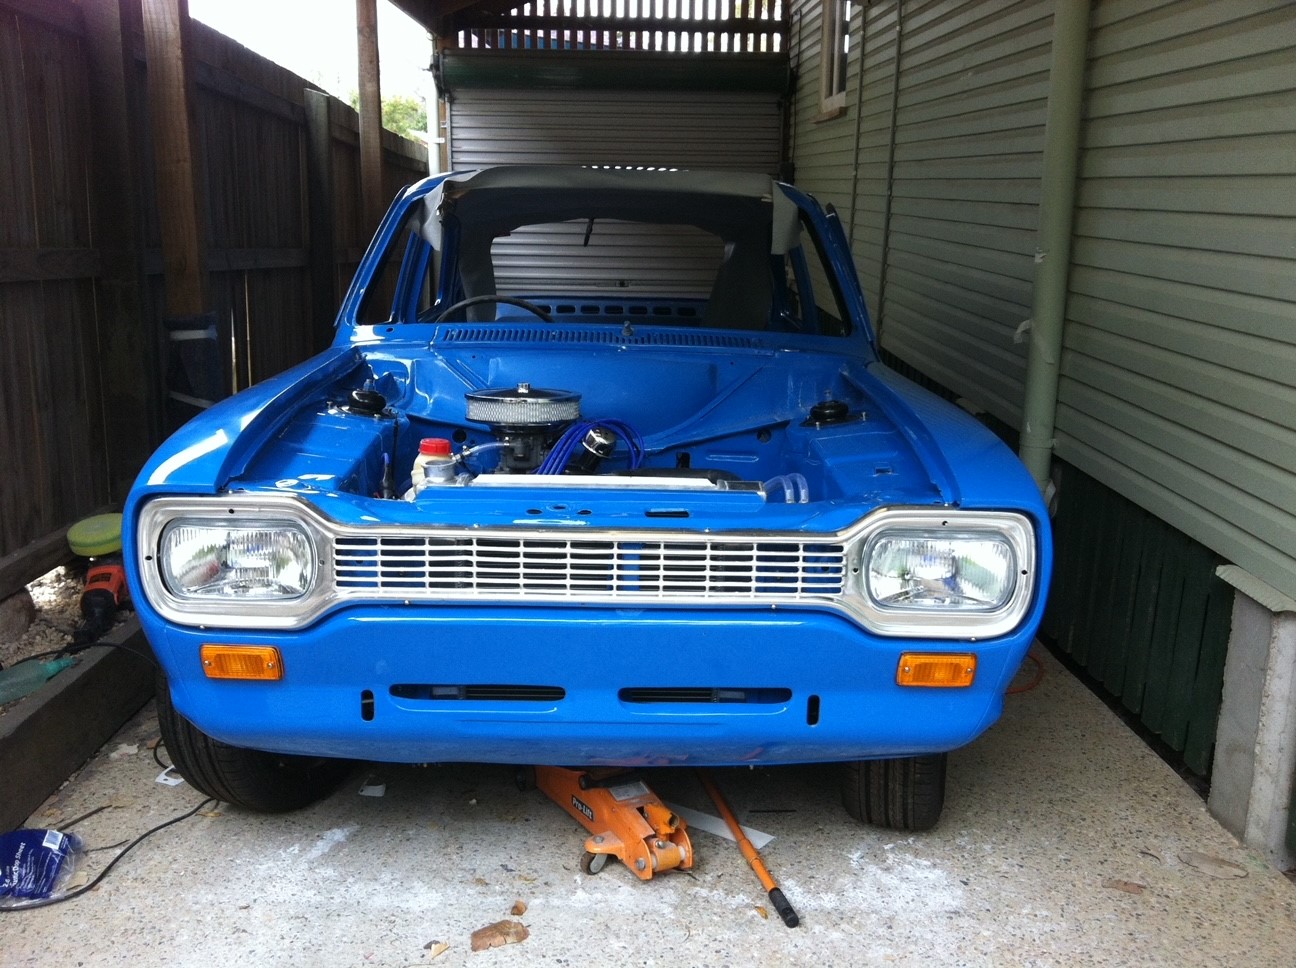 Laid up blue 1975 Ford Mk 1 Escort Coupe facing the front